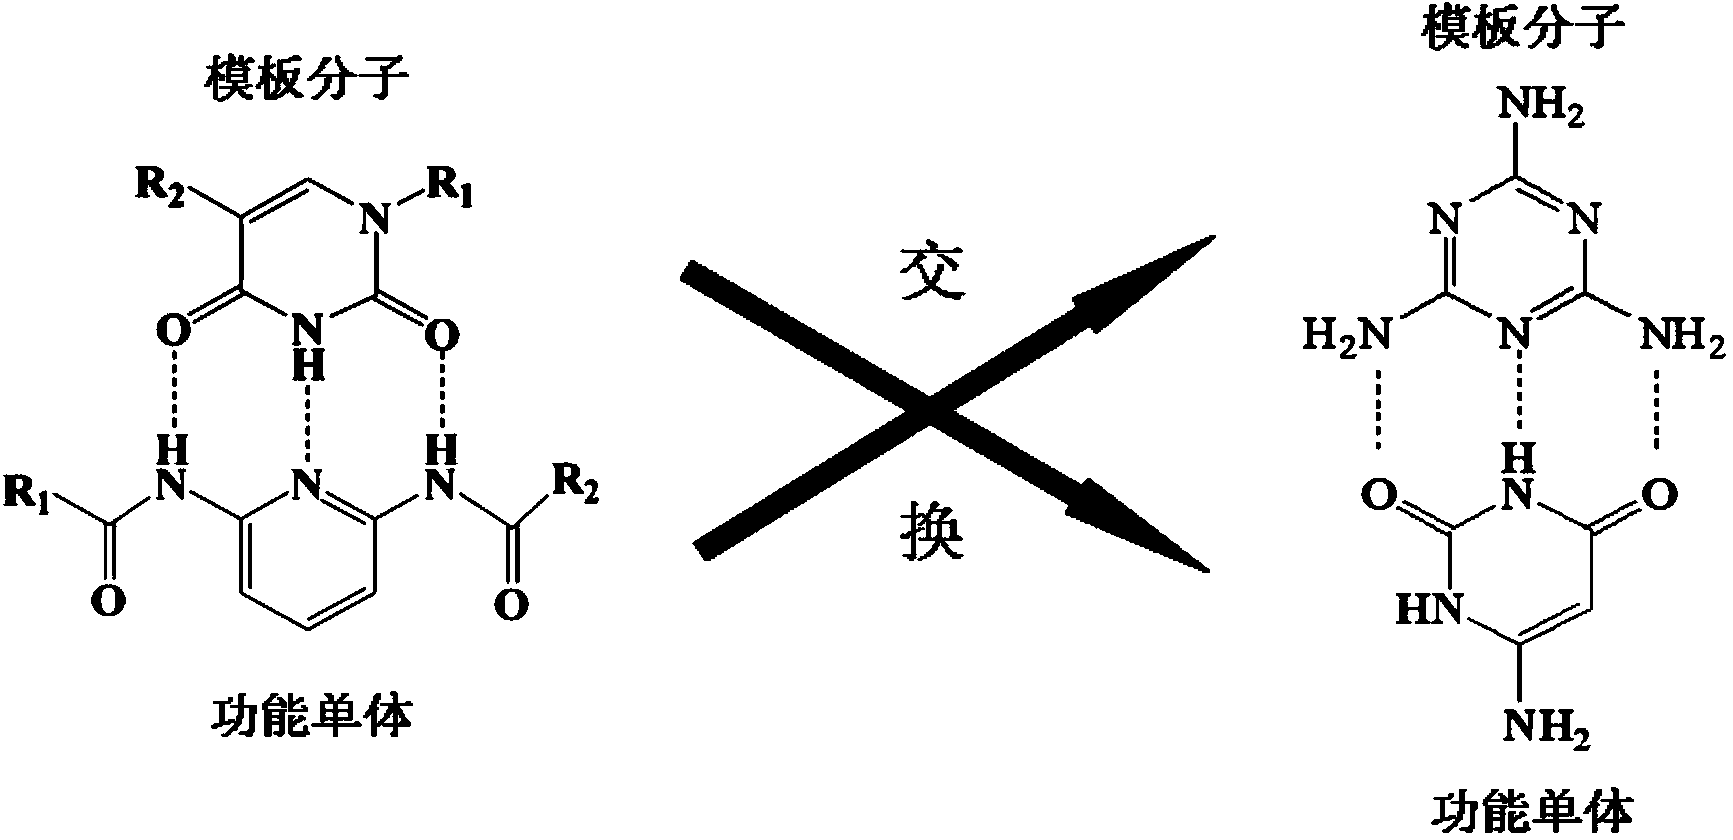 Multi-hydrogen-bond melamine core-shell molecularly imprinted polymer and preparation method thereof